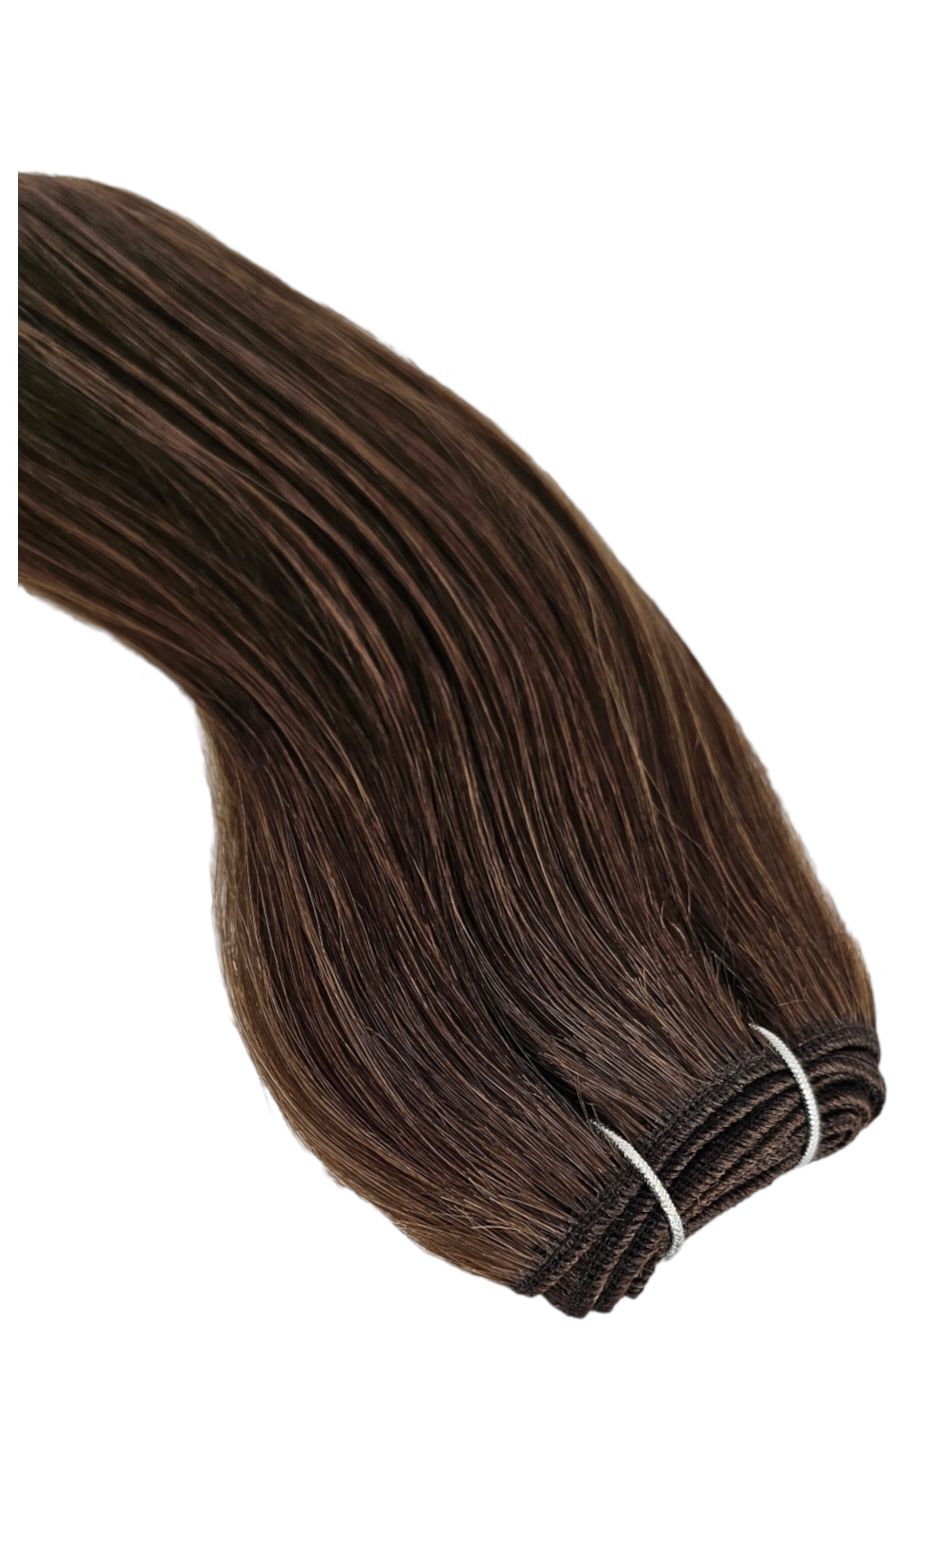 Russian Weft Hair Extensions